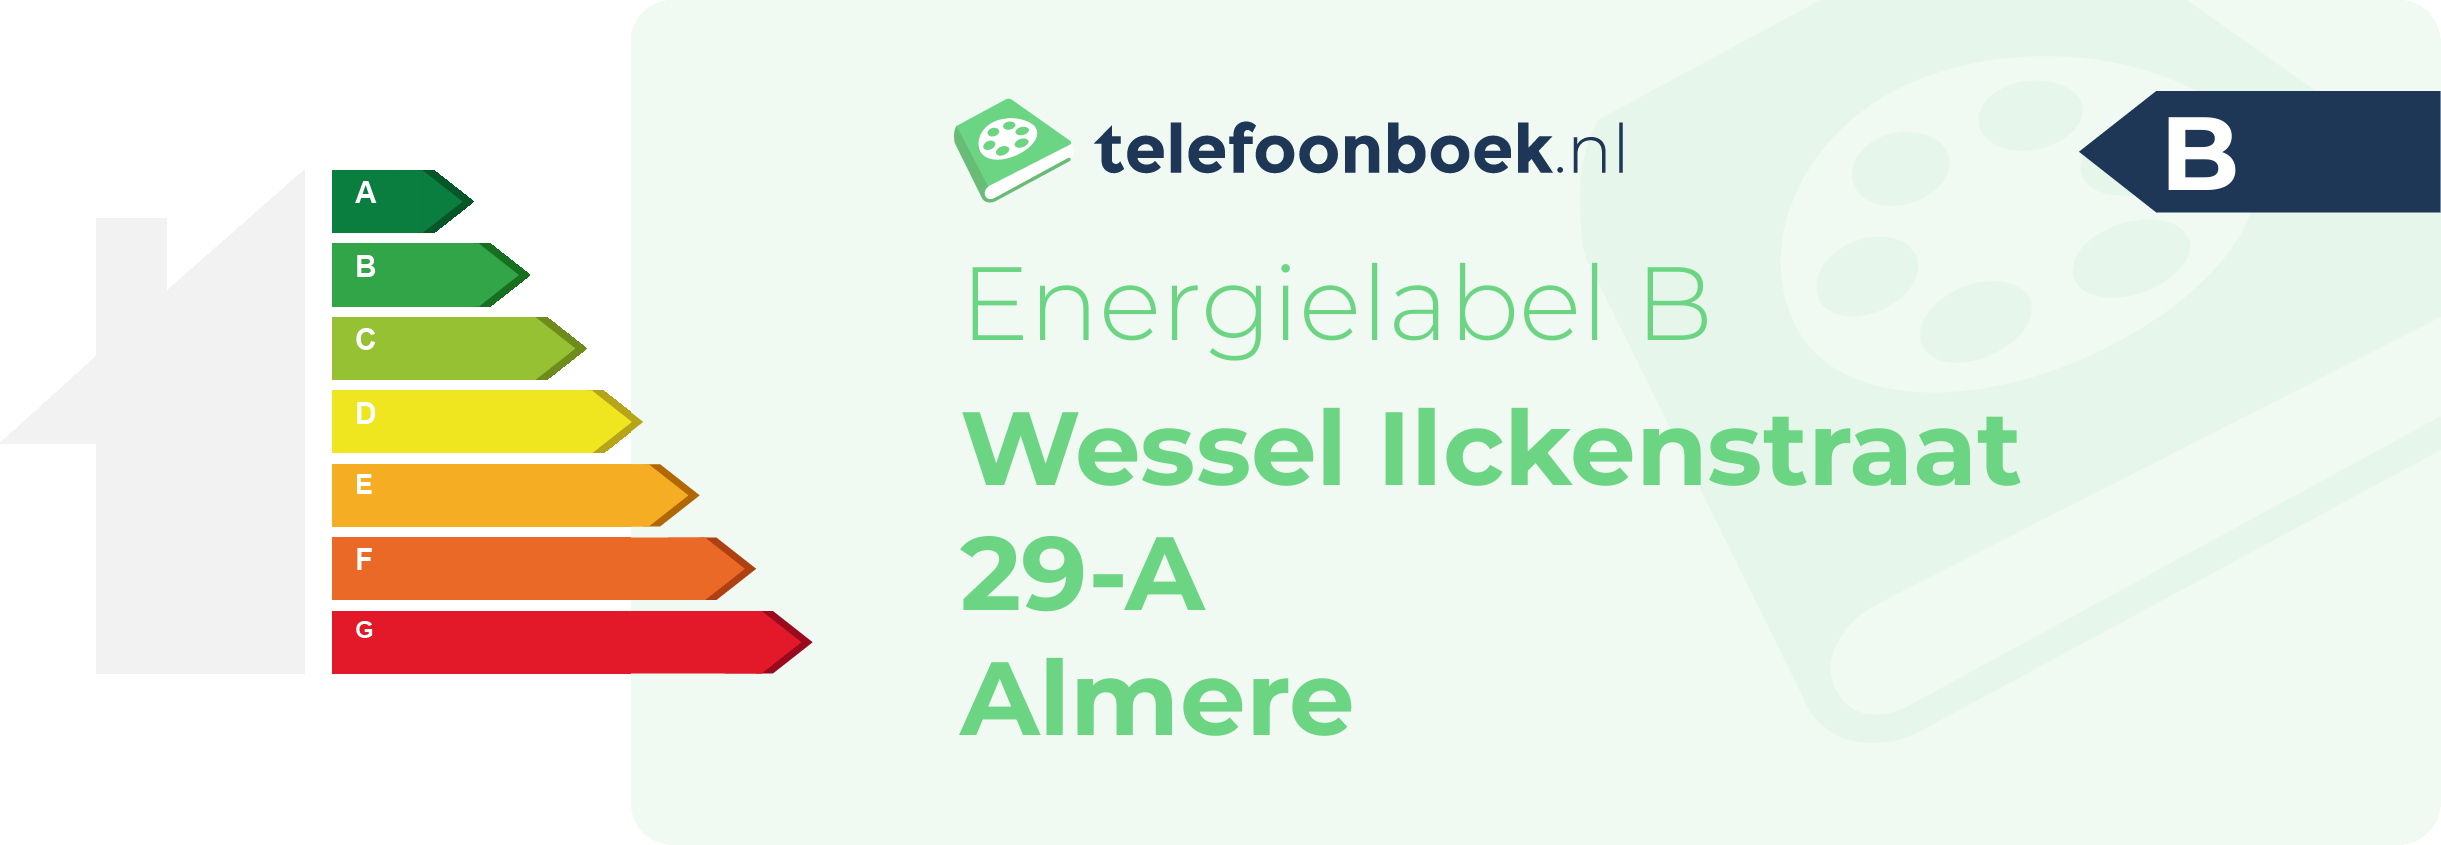 Energielabel Wessel Ilckenstraat 29-A Almere